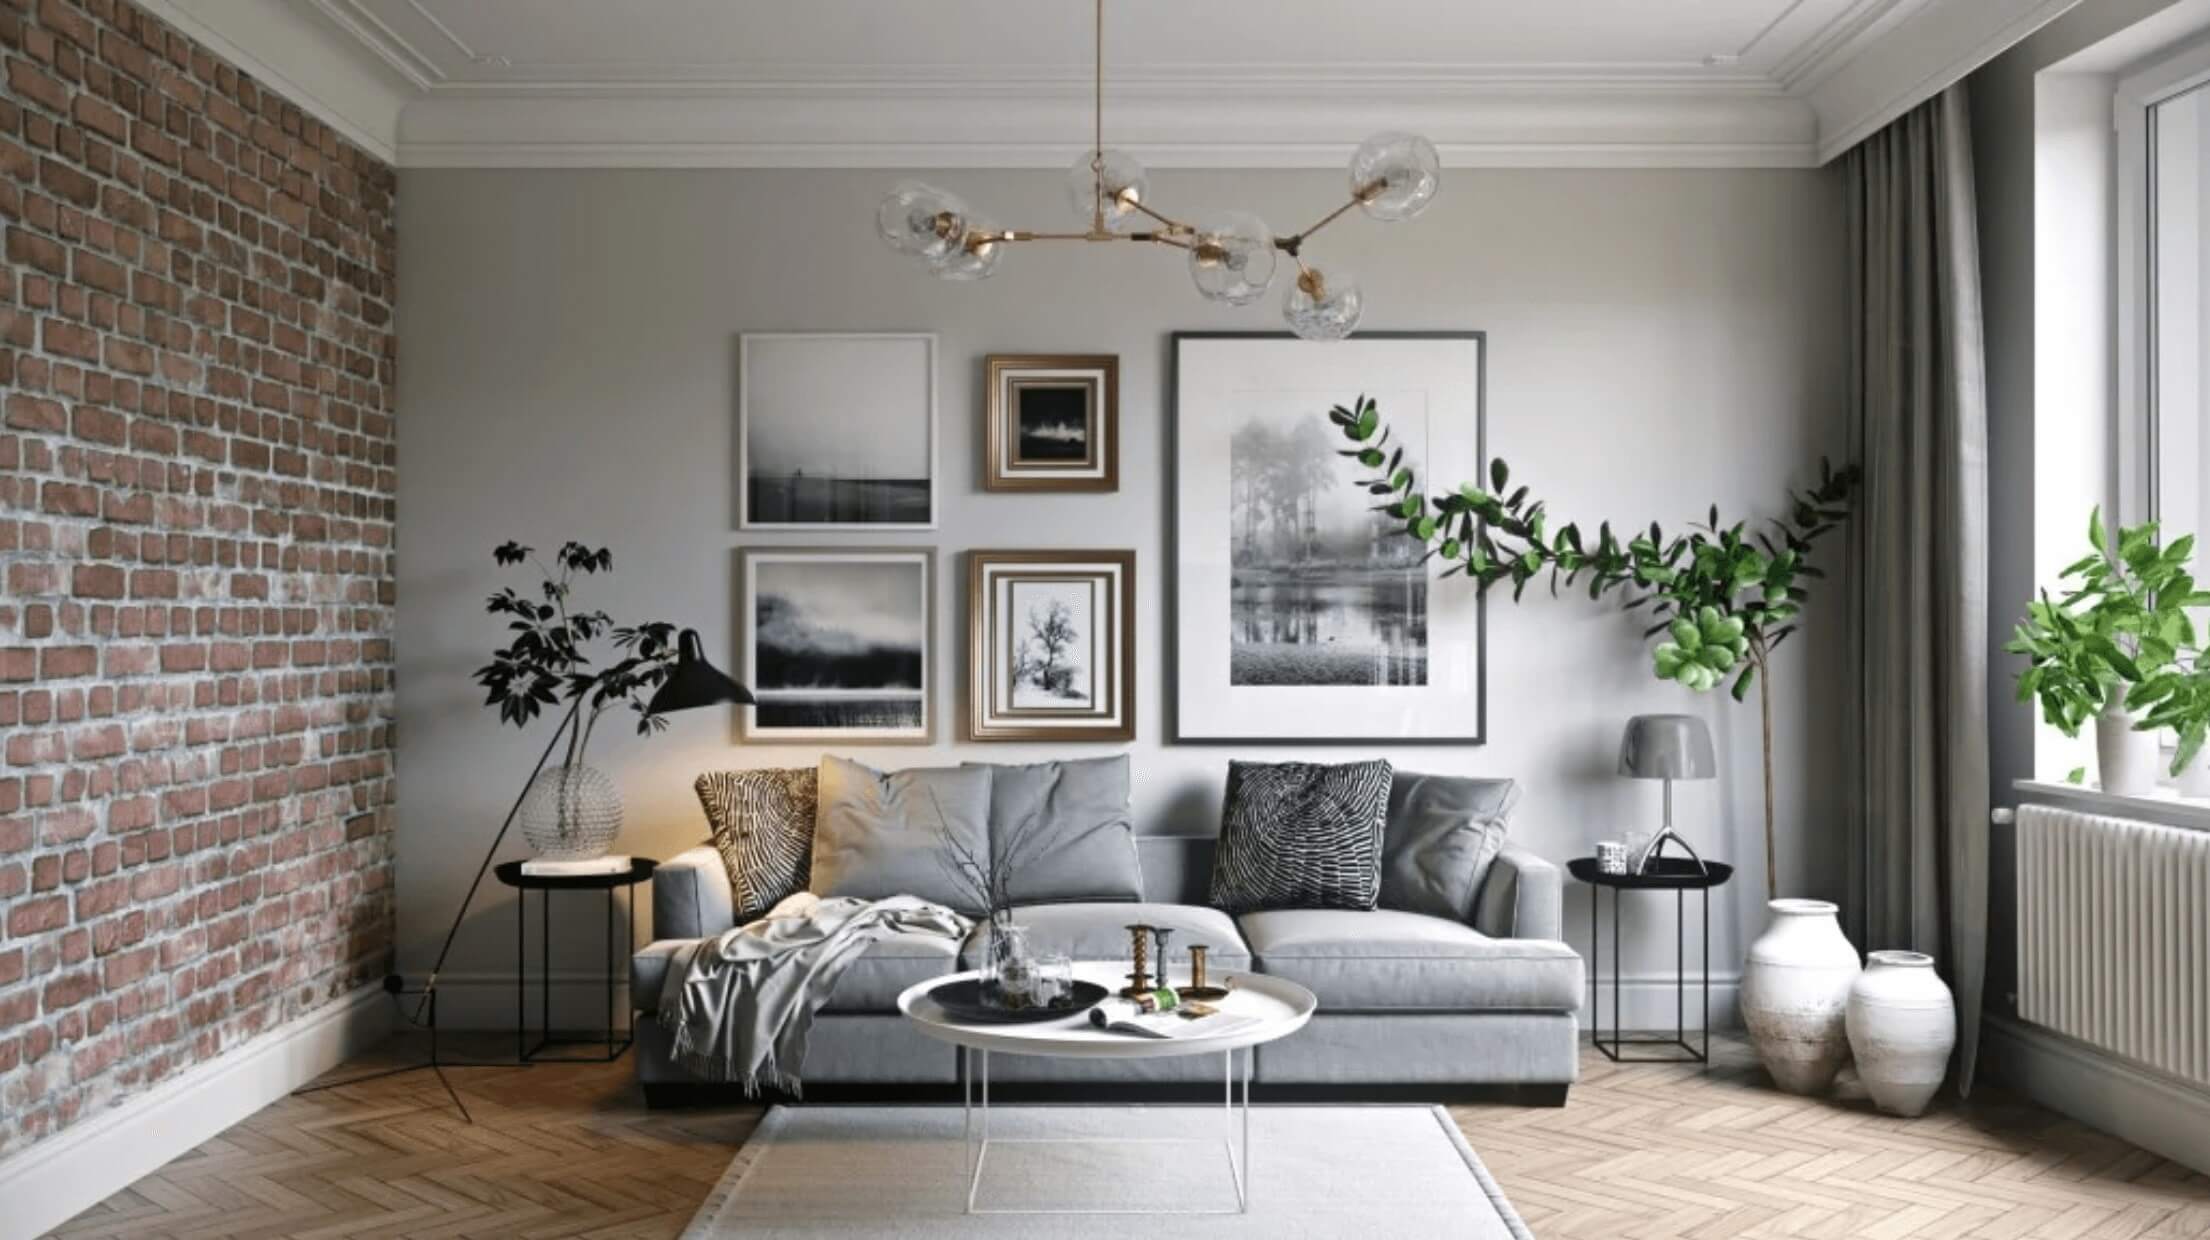 Living Room Beautiful Decor: A Reflection Of Style And Comfort